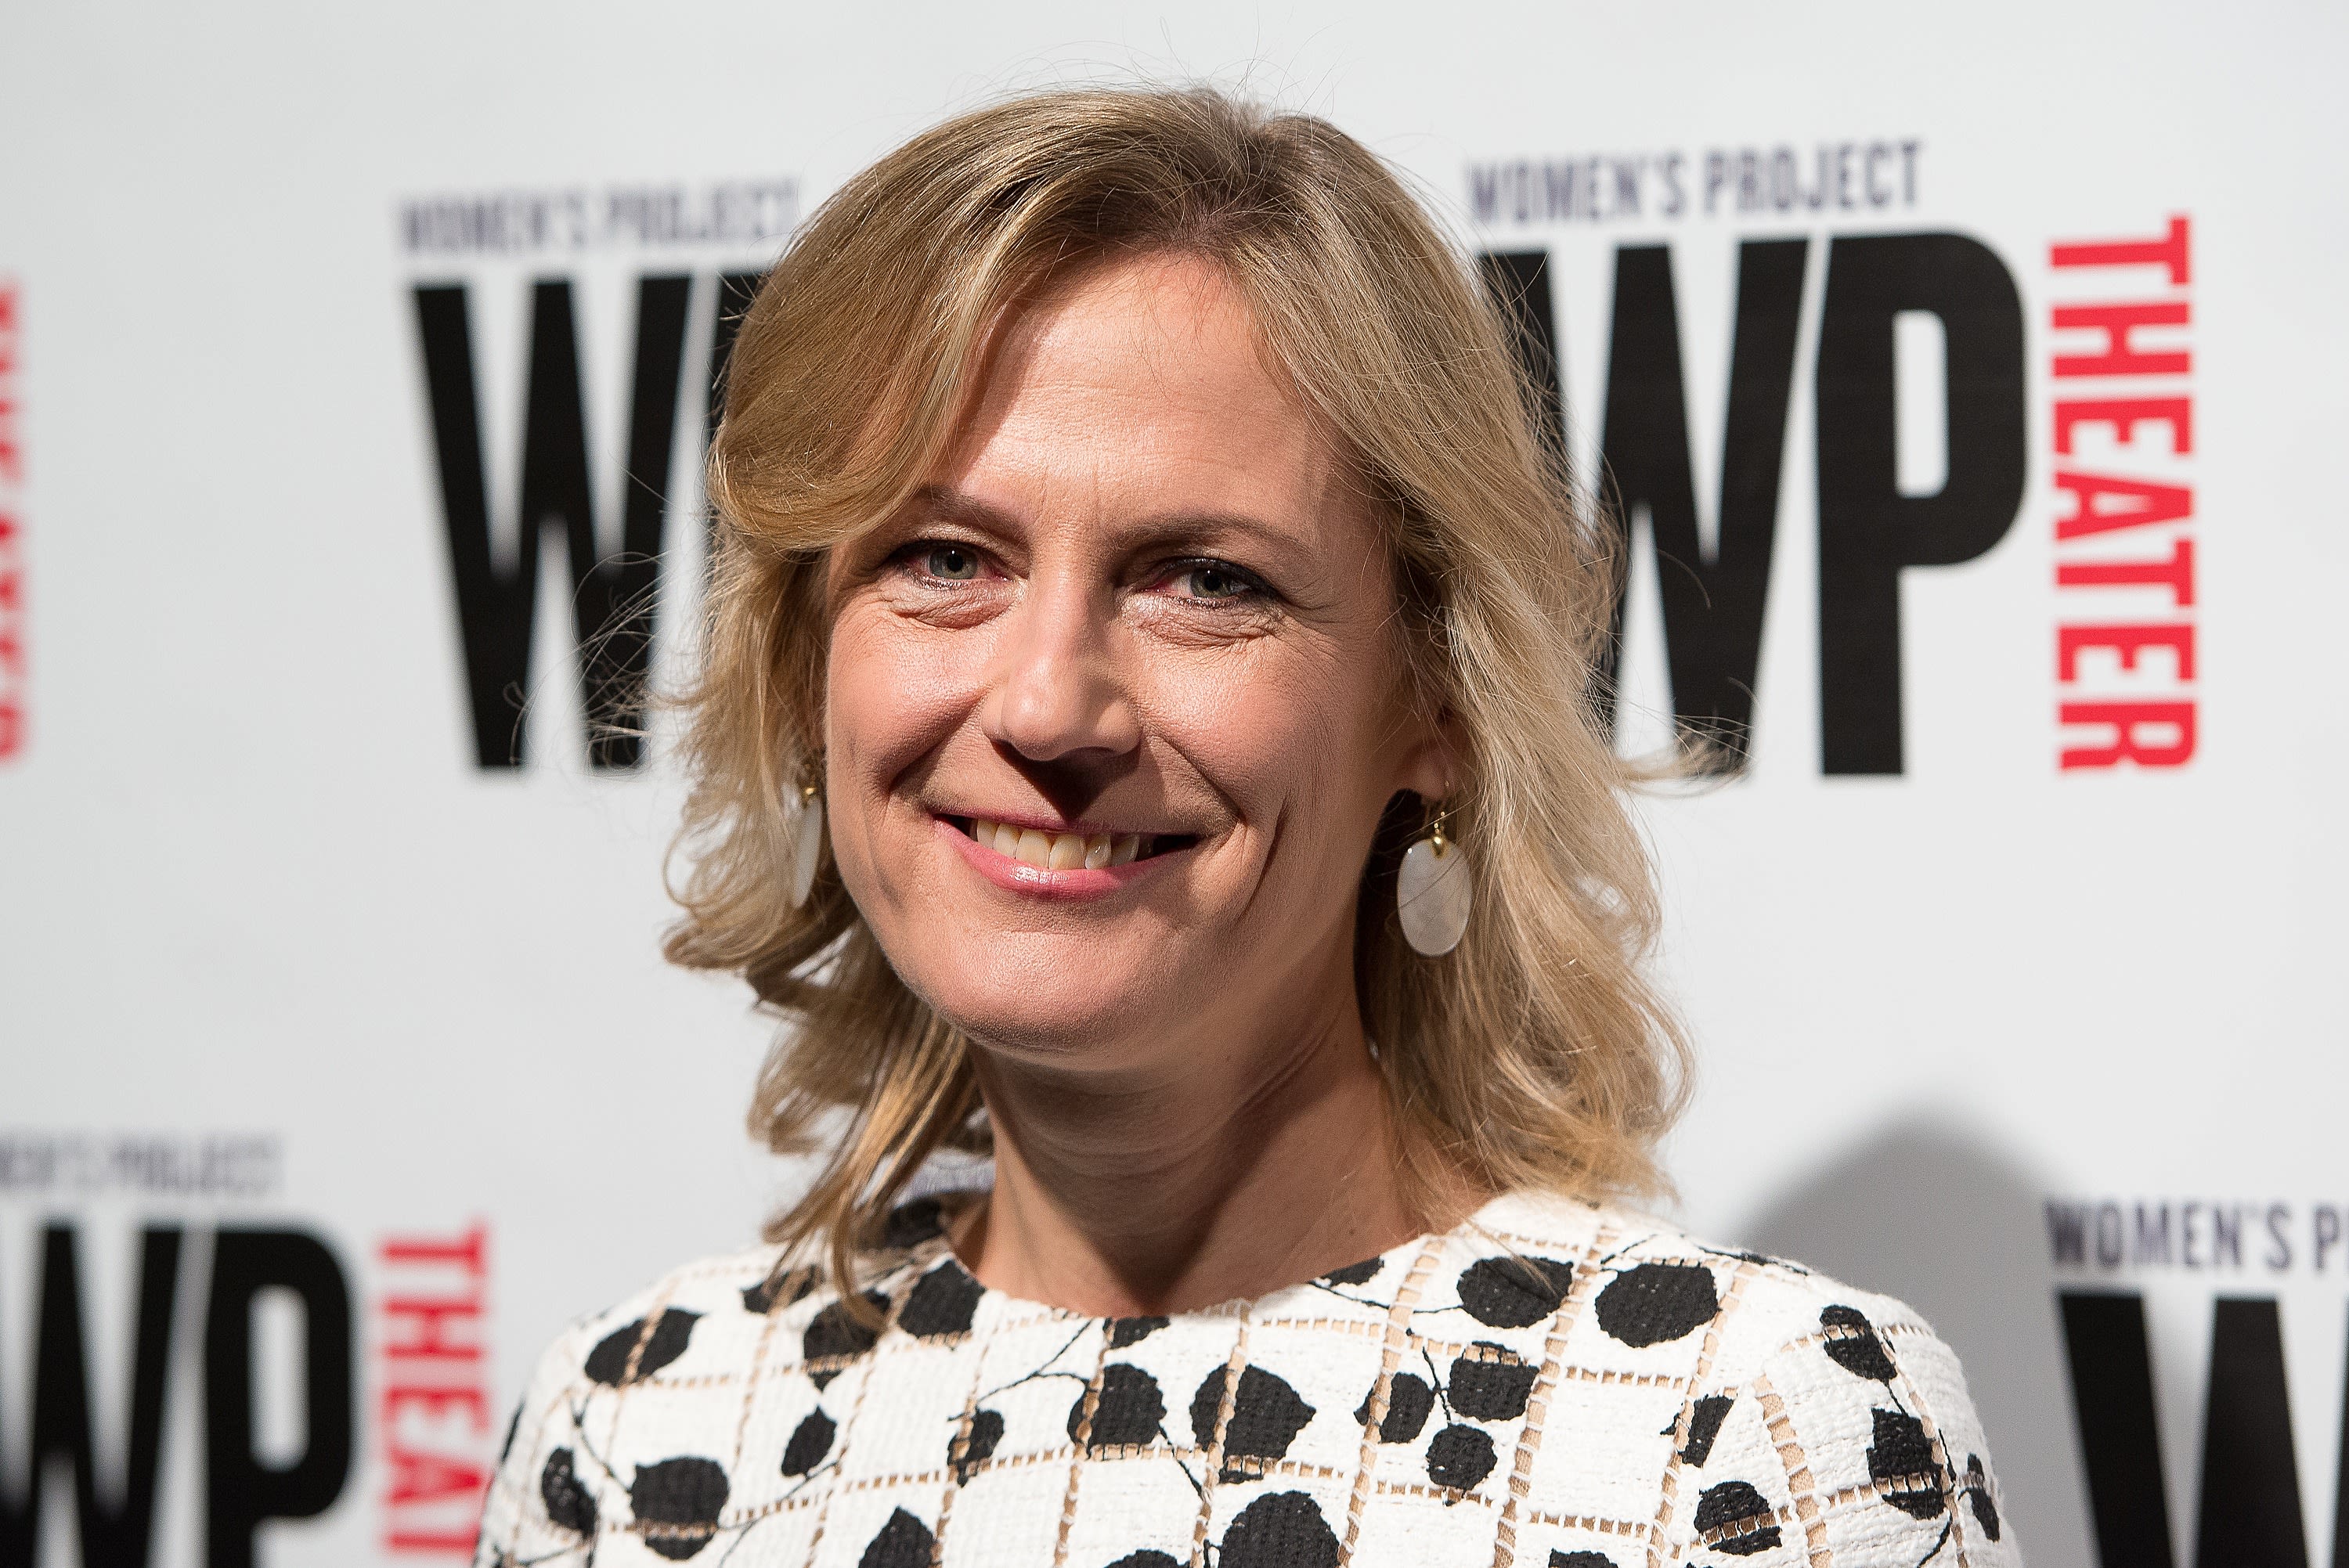 Warner Bros. names Ann Sarnoff as new chair and CEO